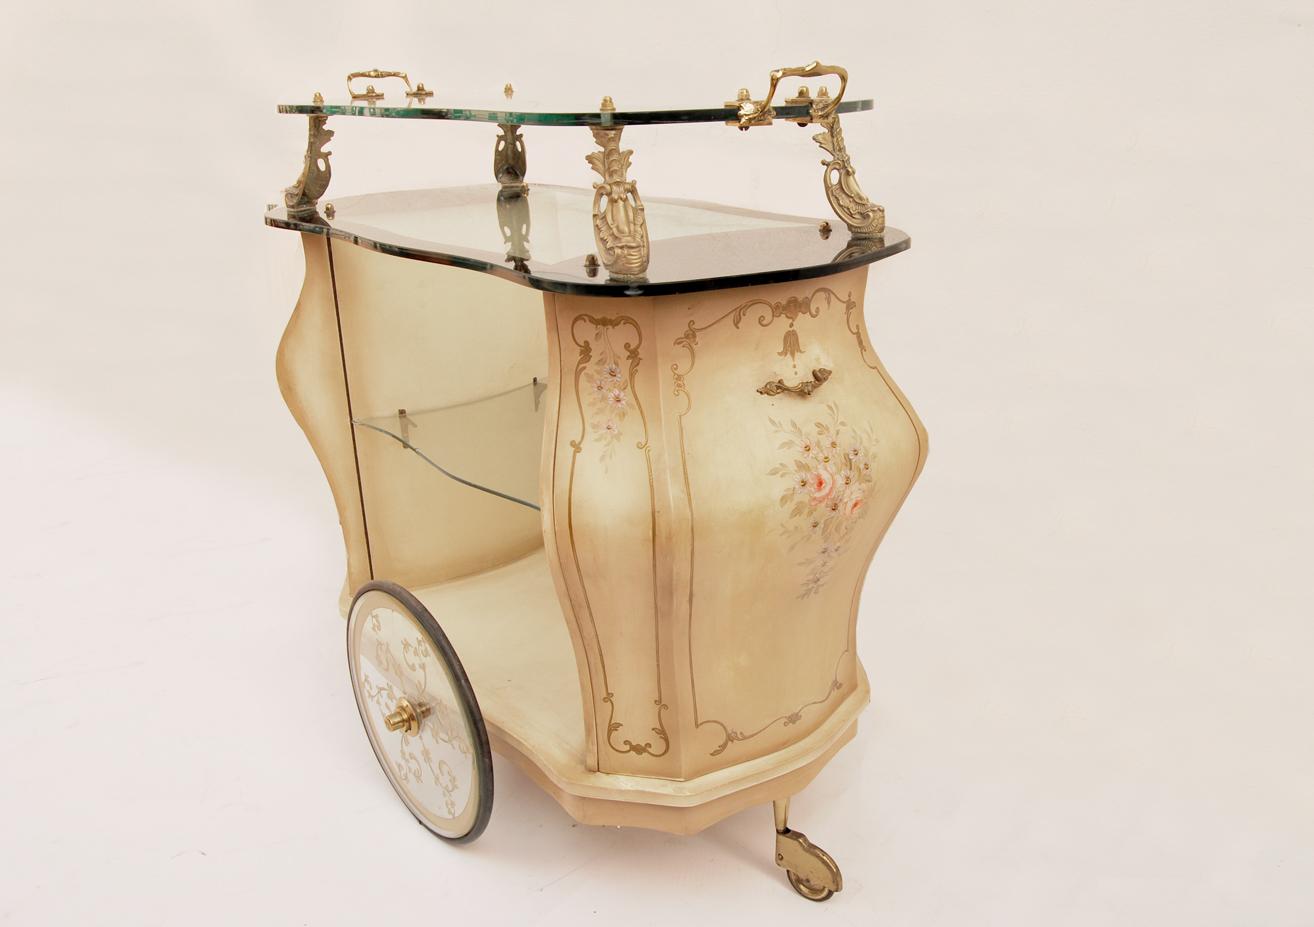 Beautiful vintage bar cart dating from 1960. 
This item, made in Italy, is made of wood, glass and brass.
The wooden frame is decorated with flowers and frames reminiscent of the Venetian style. The top glass and that of the wheels, transparent, 